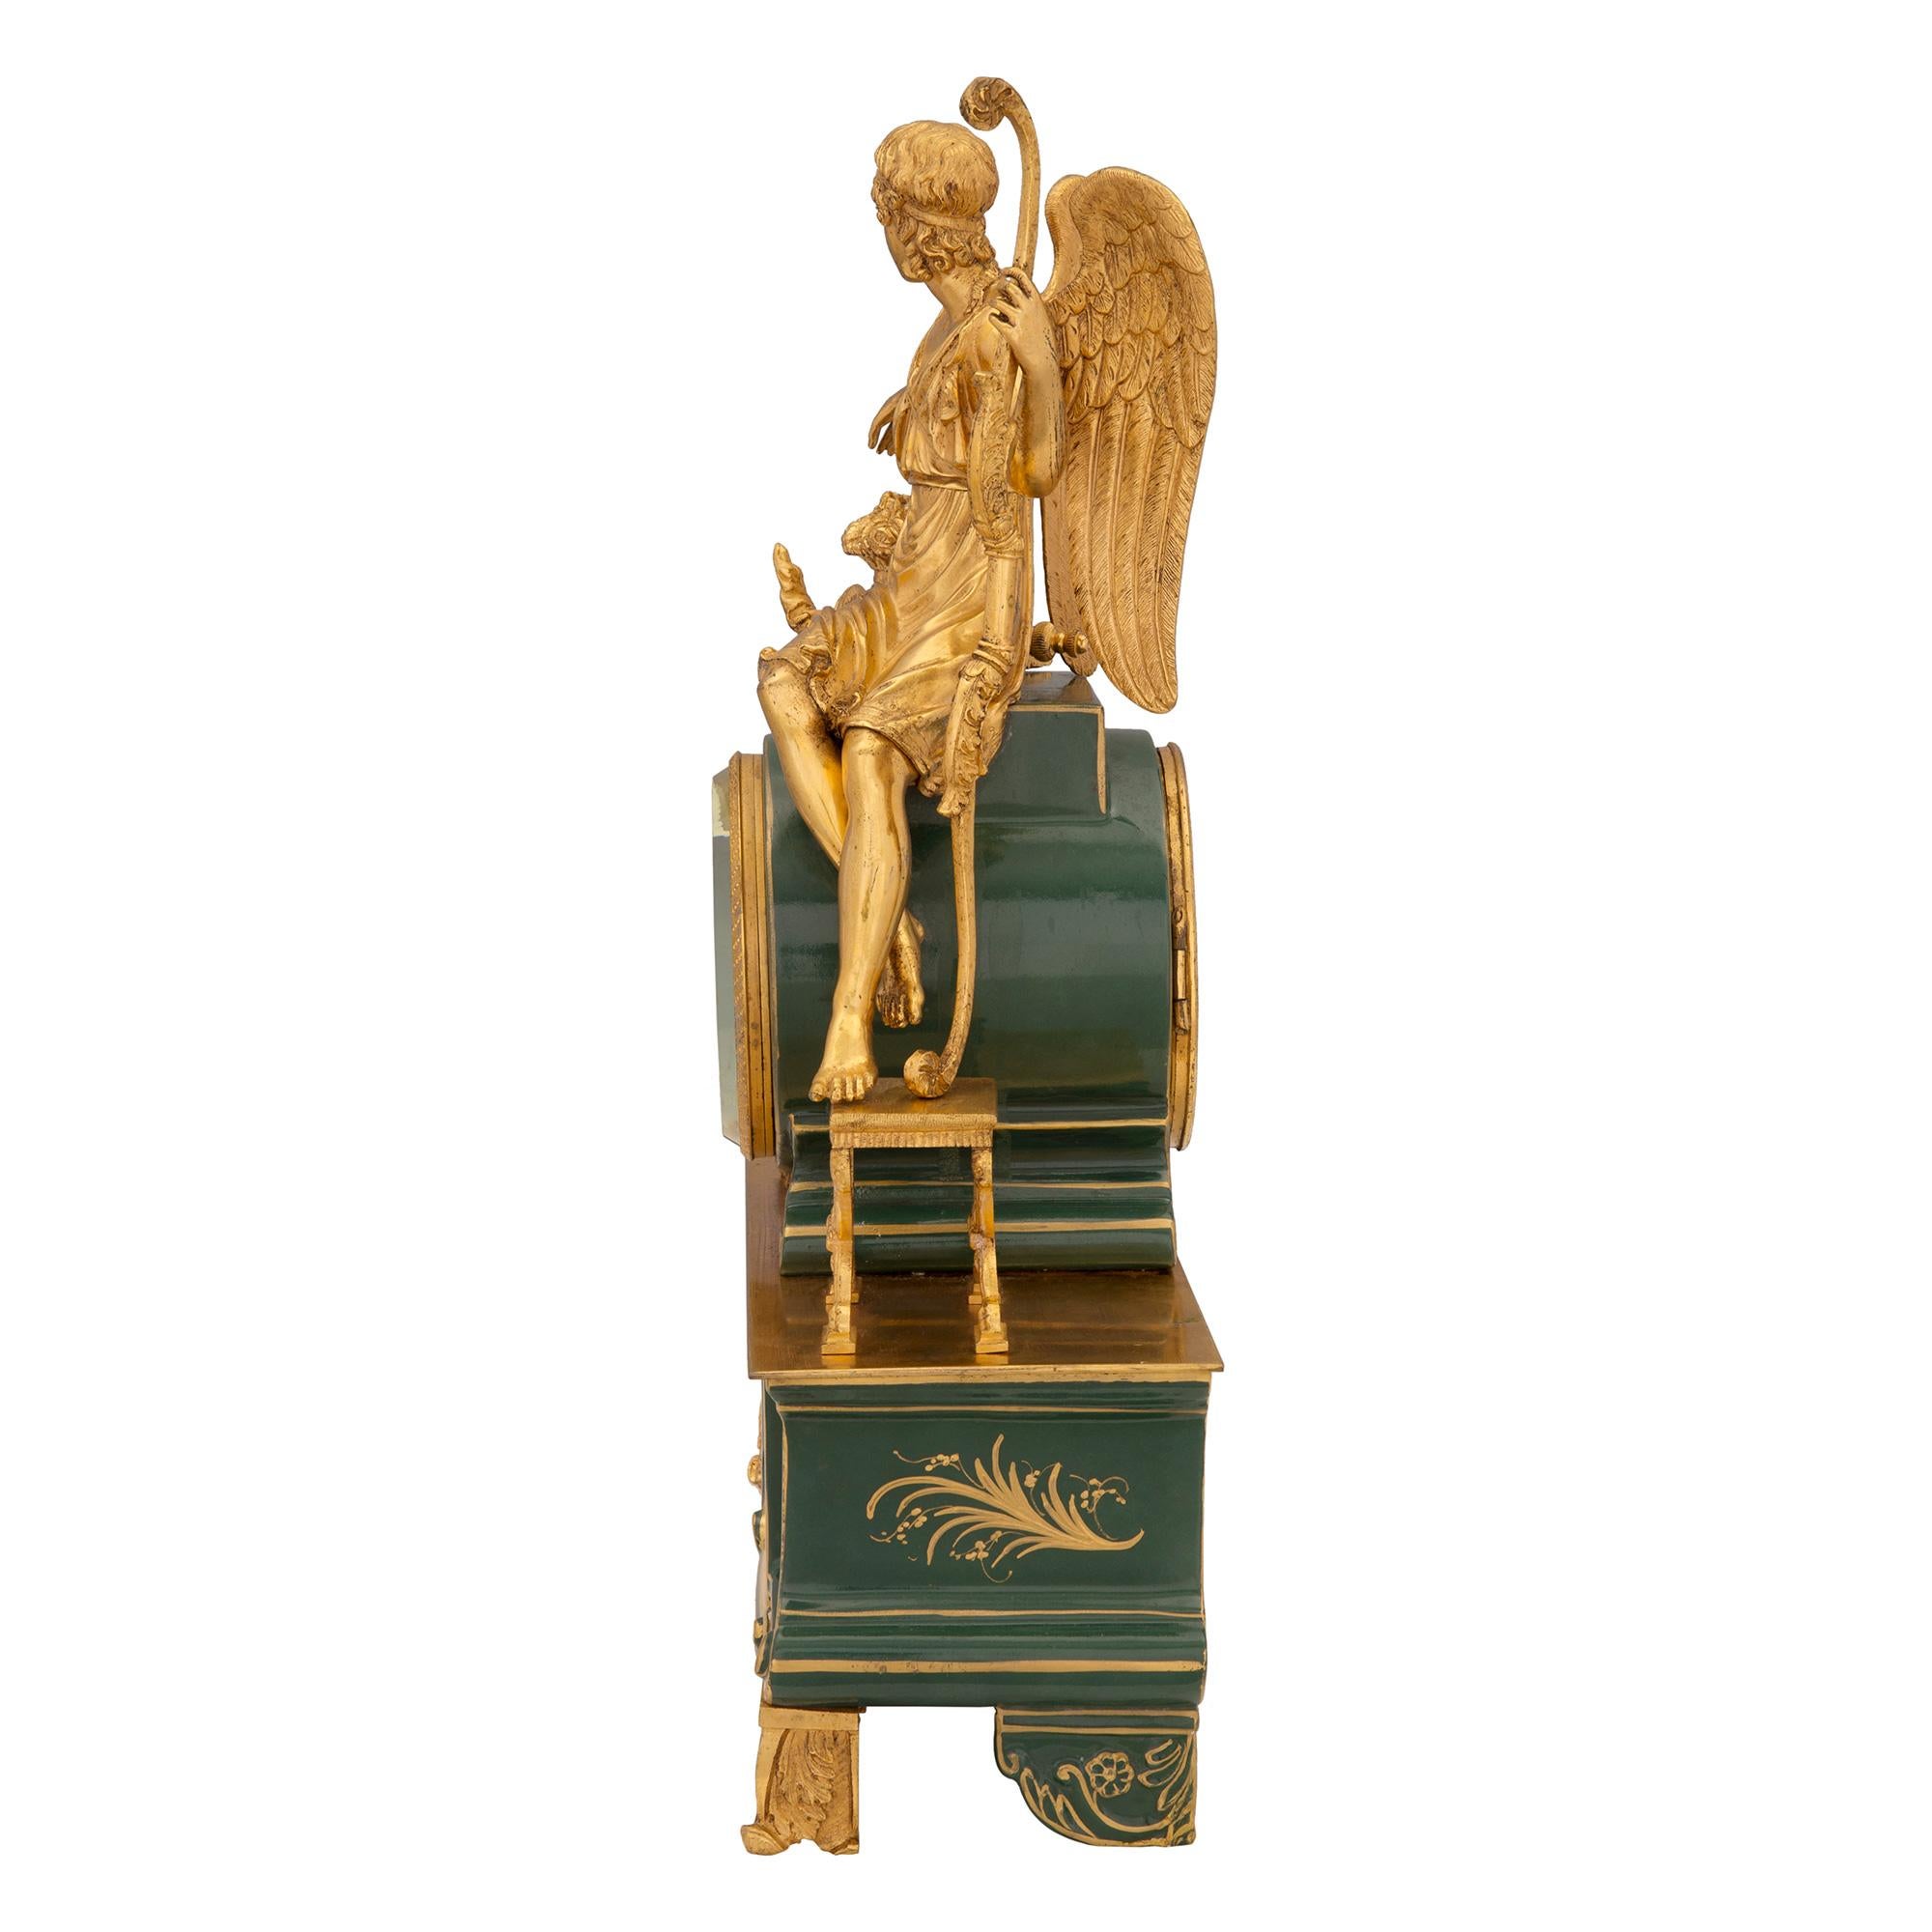 French 19th Century Neo-Classical Style Porcelain and Ormolu Clock In Good Condition For Sale In West Palm Beach, FL